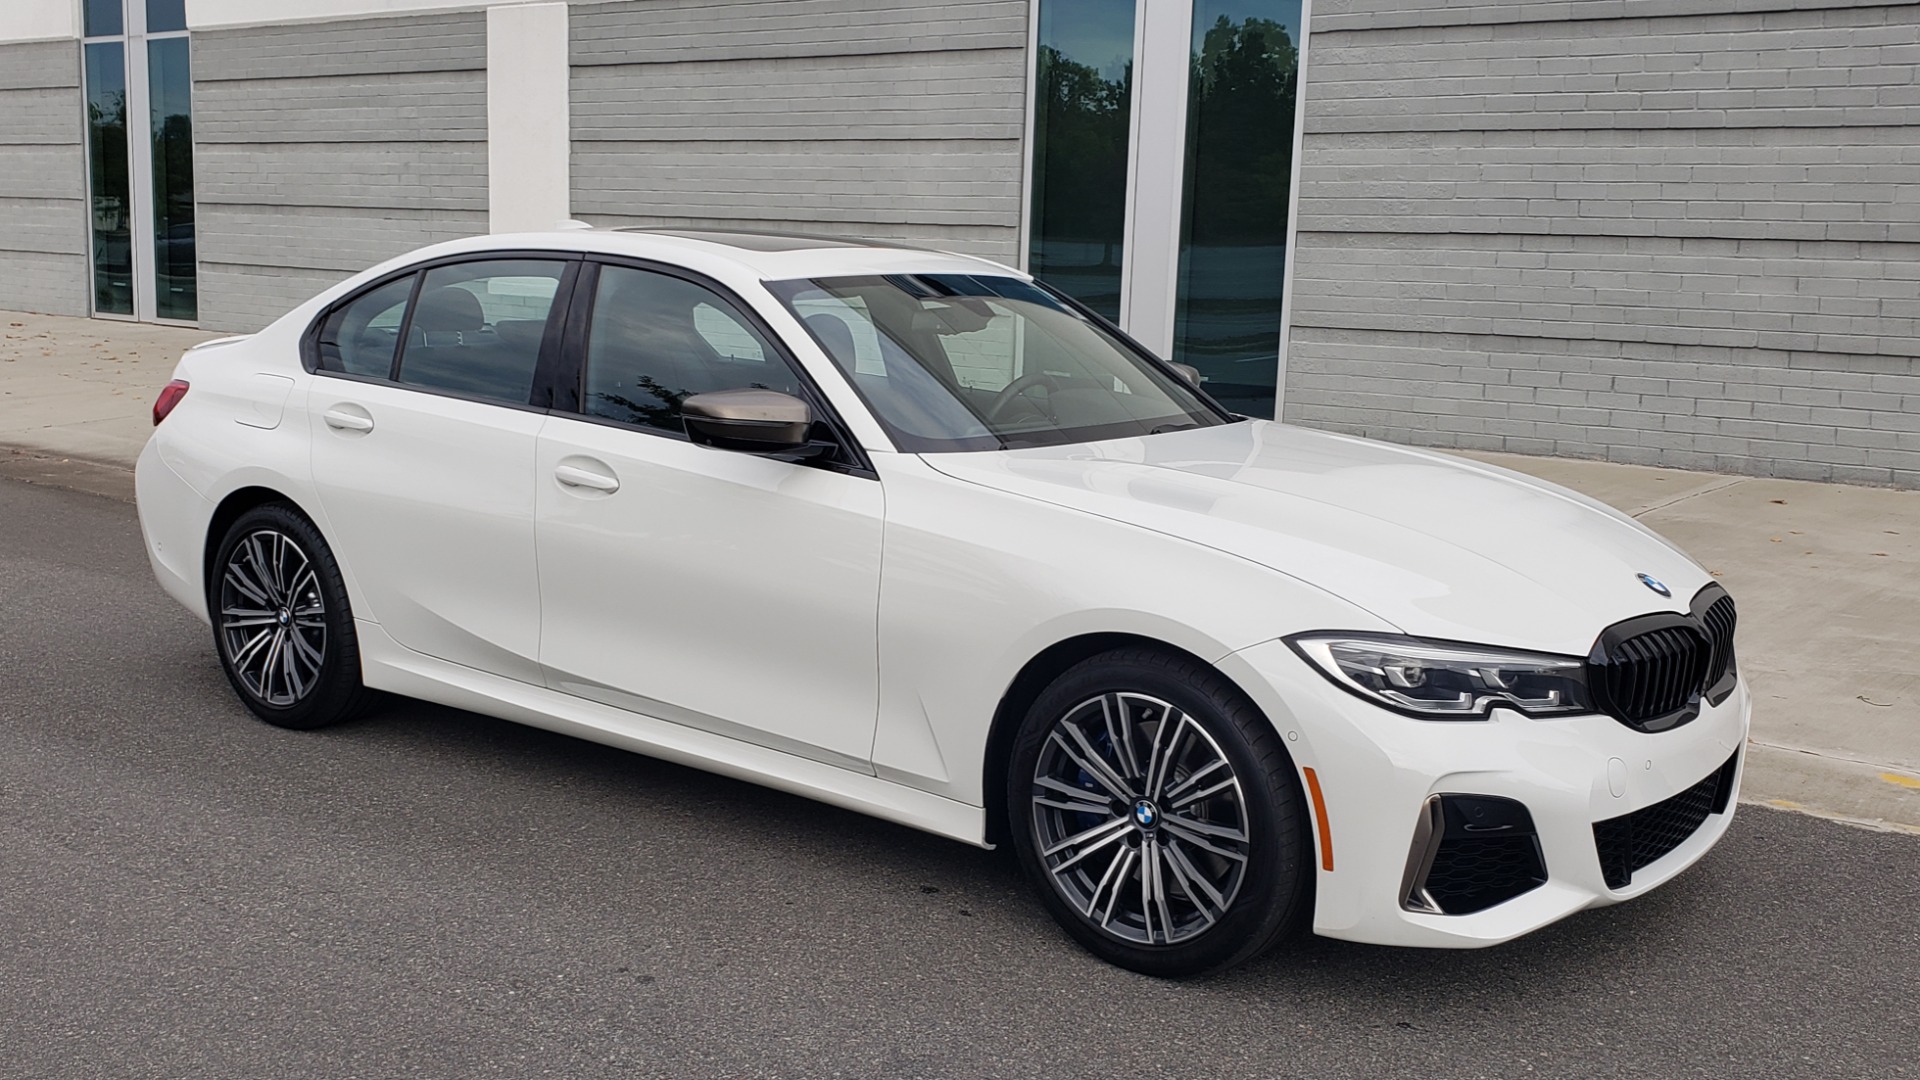 Used 2020 BMW 3 SERIES M340I SEDAN / 3.0L / 8-SPD AUTO / NAV / SUNROOF / REARVIEW for sale Sold at Formula Imports in Charlotte NC 28227 7